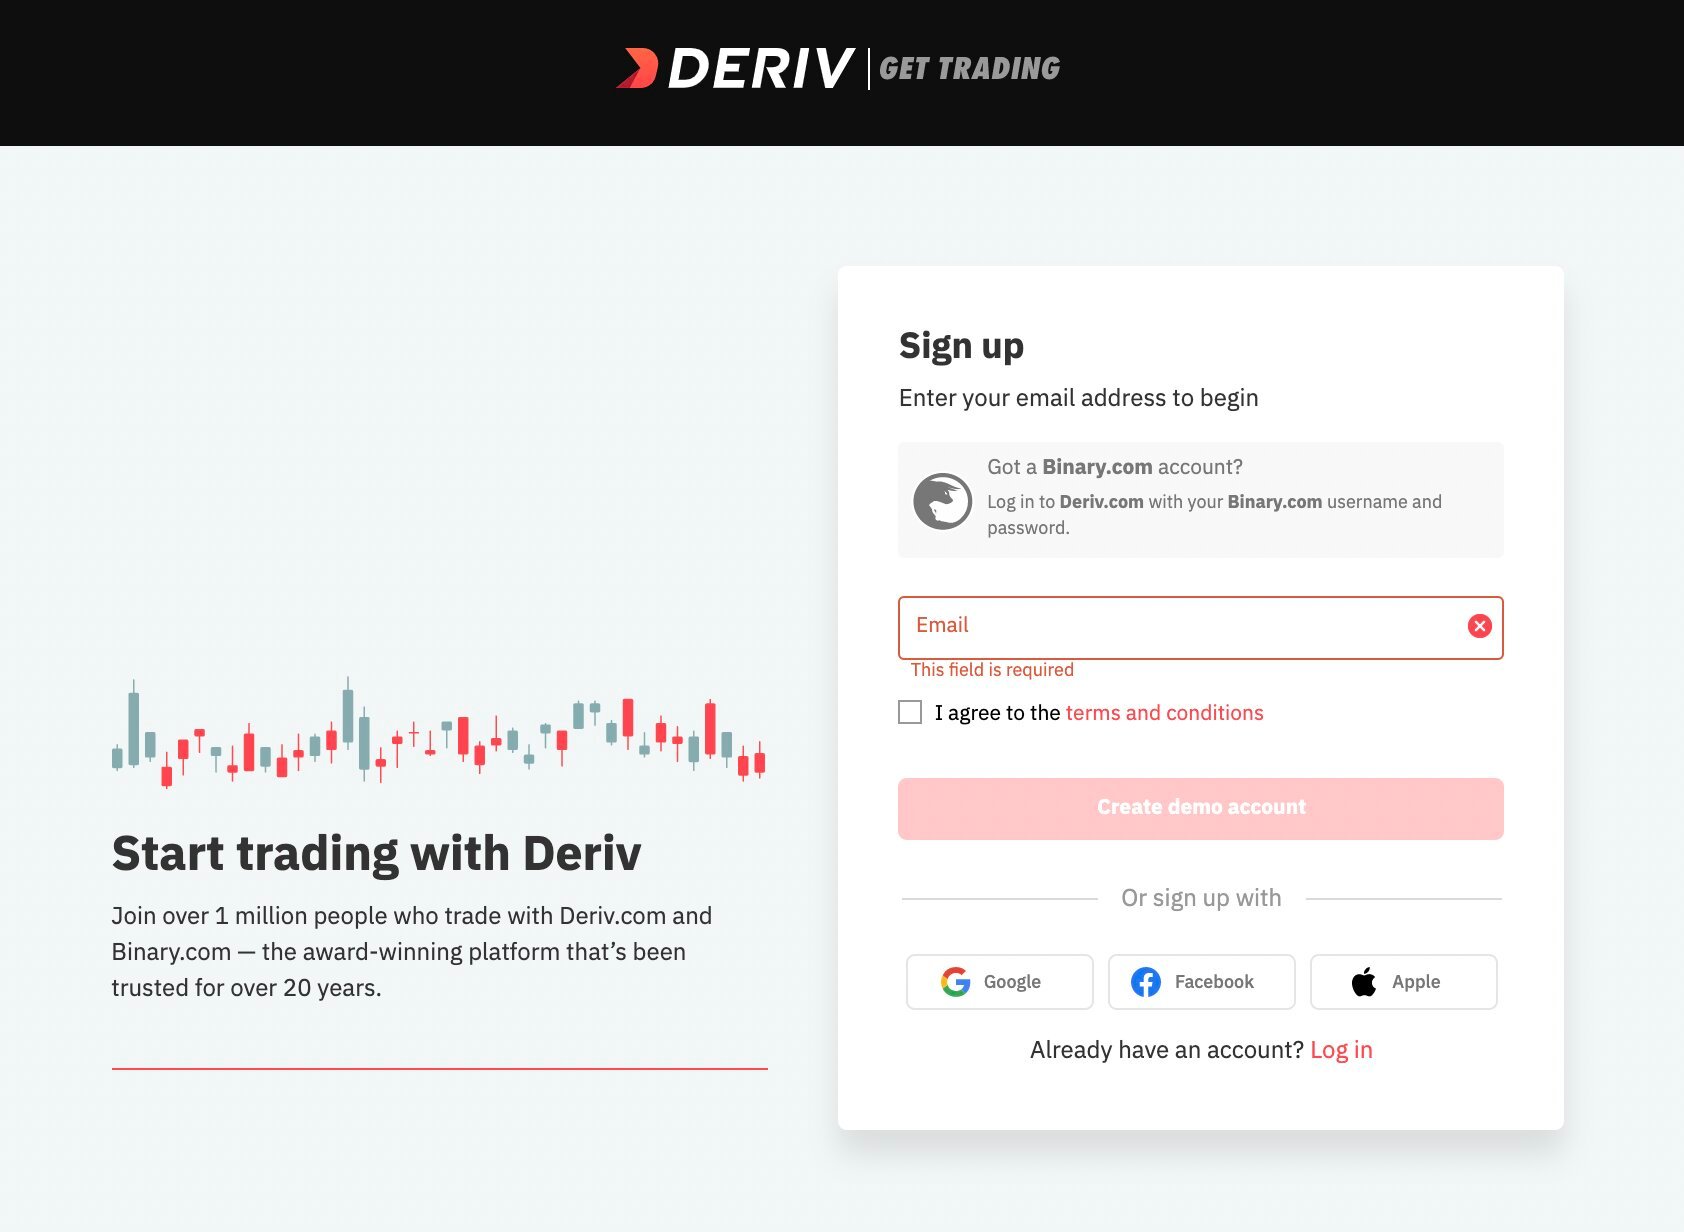 Deriv’s sign up page